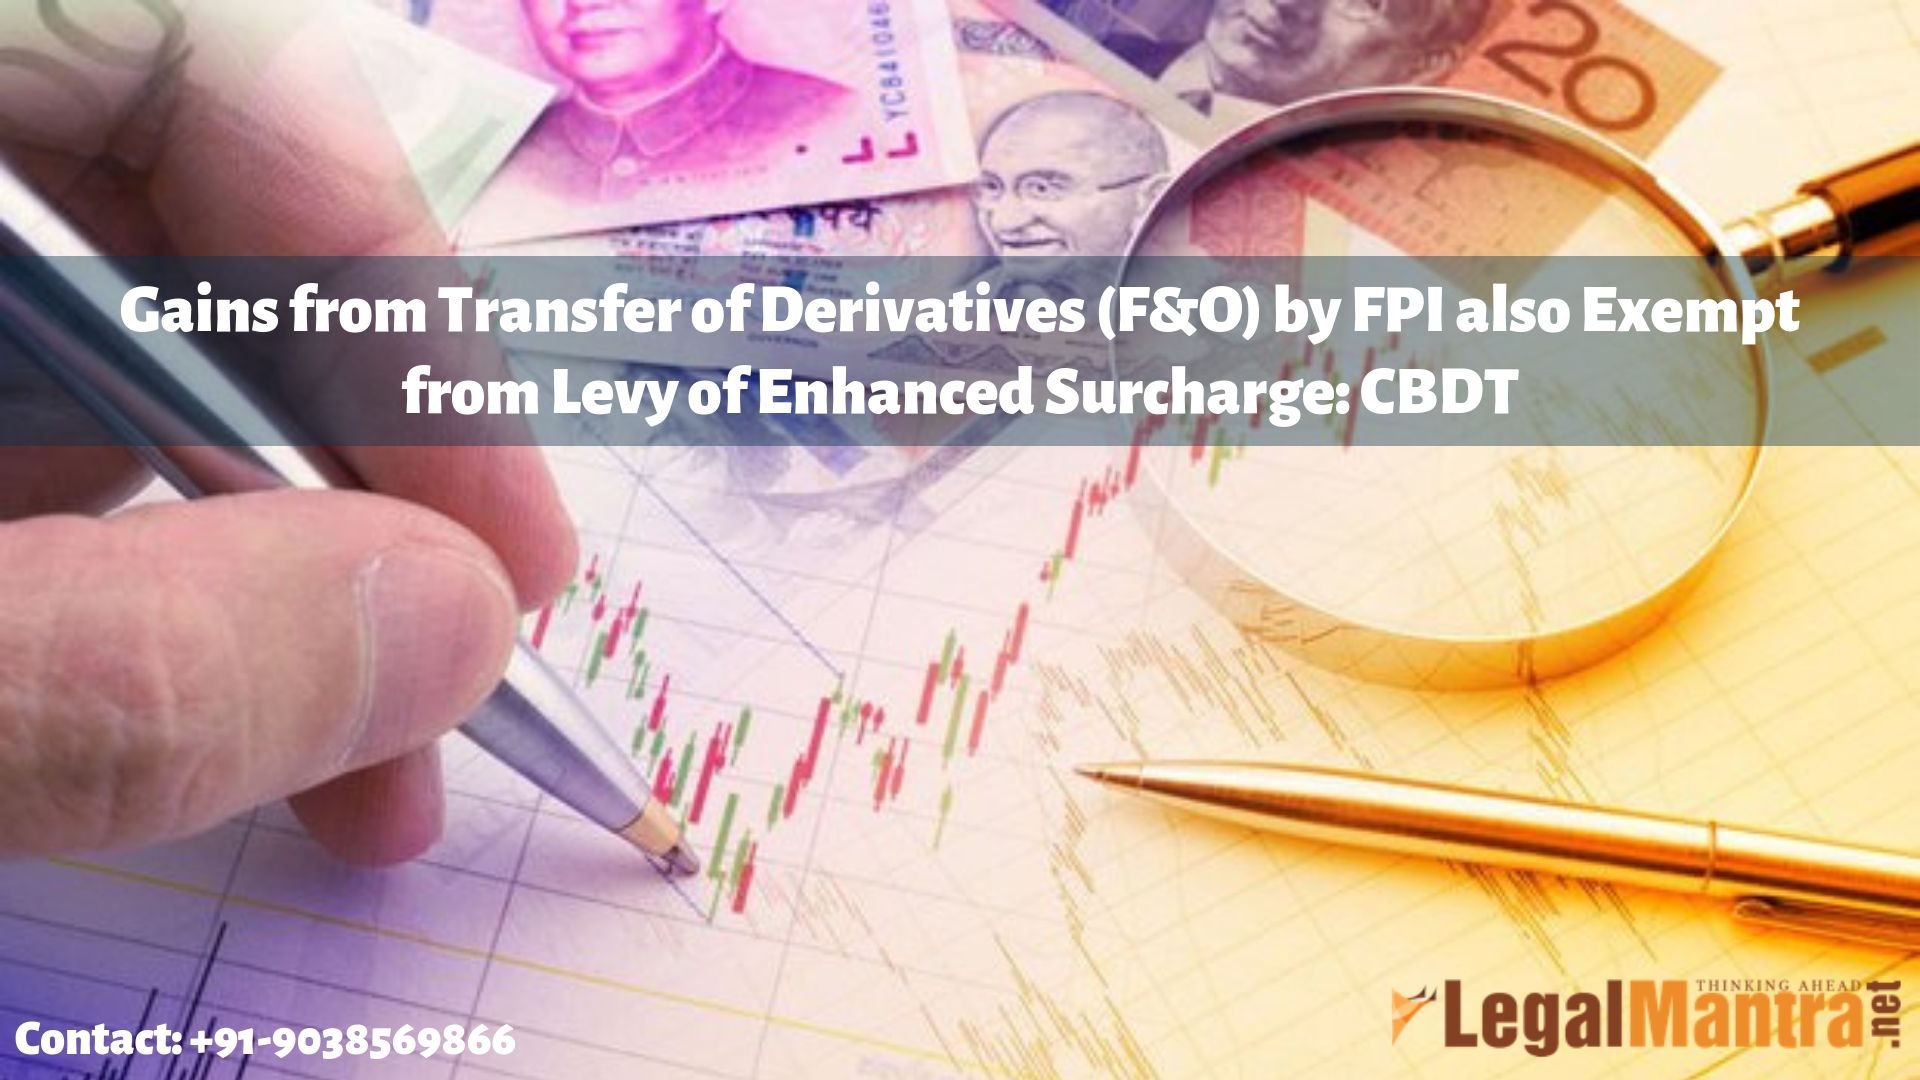 Gains from transfer of derivatives (F&O) by FPI also exempt from levy of enhanced surcharge: CBDT